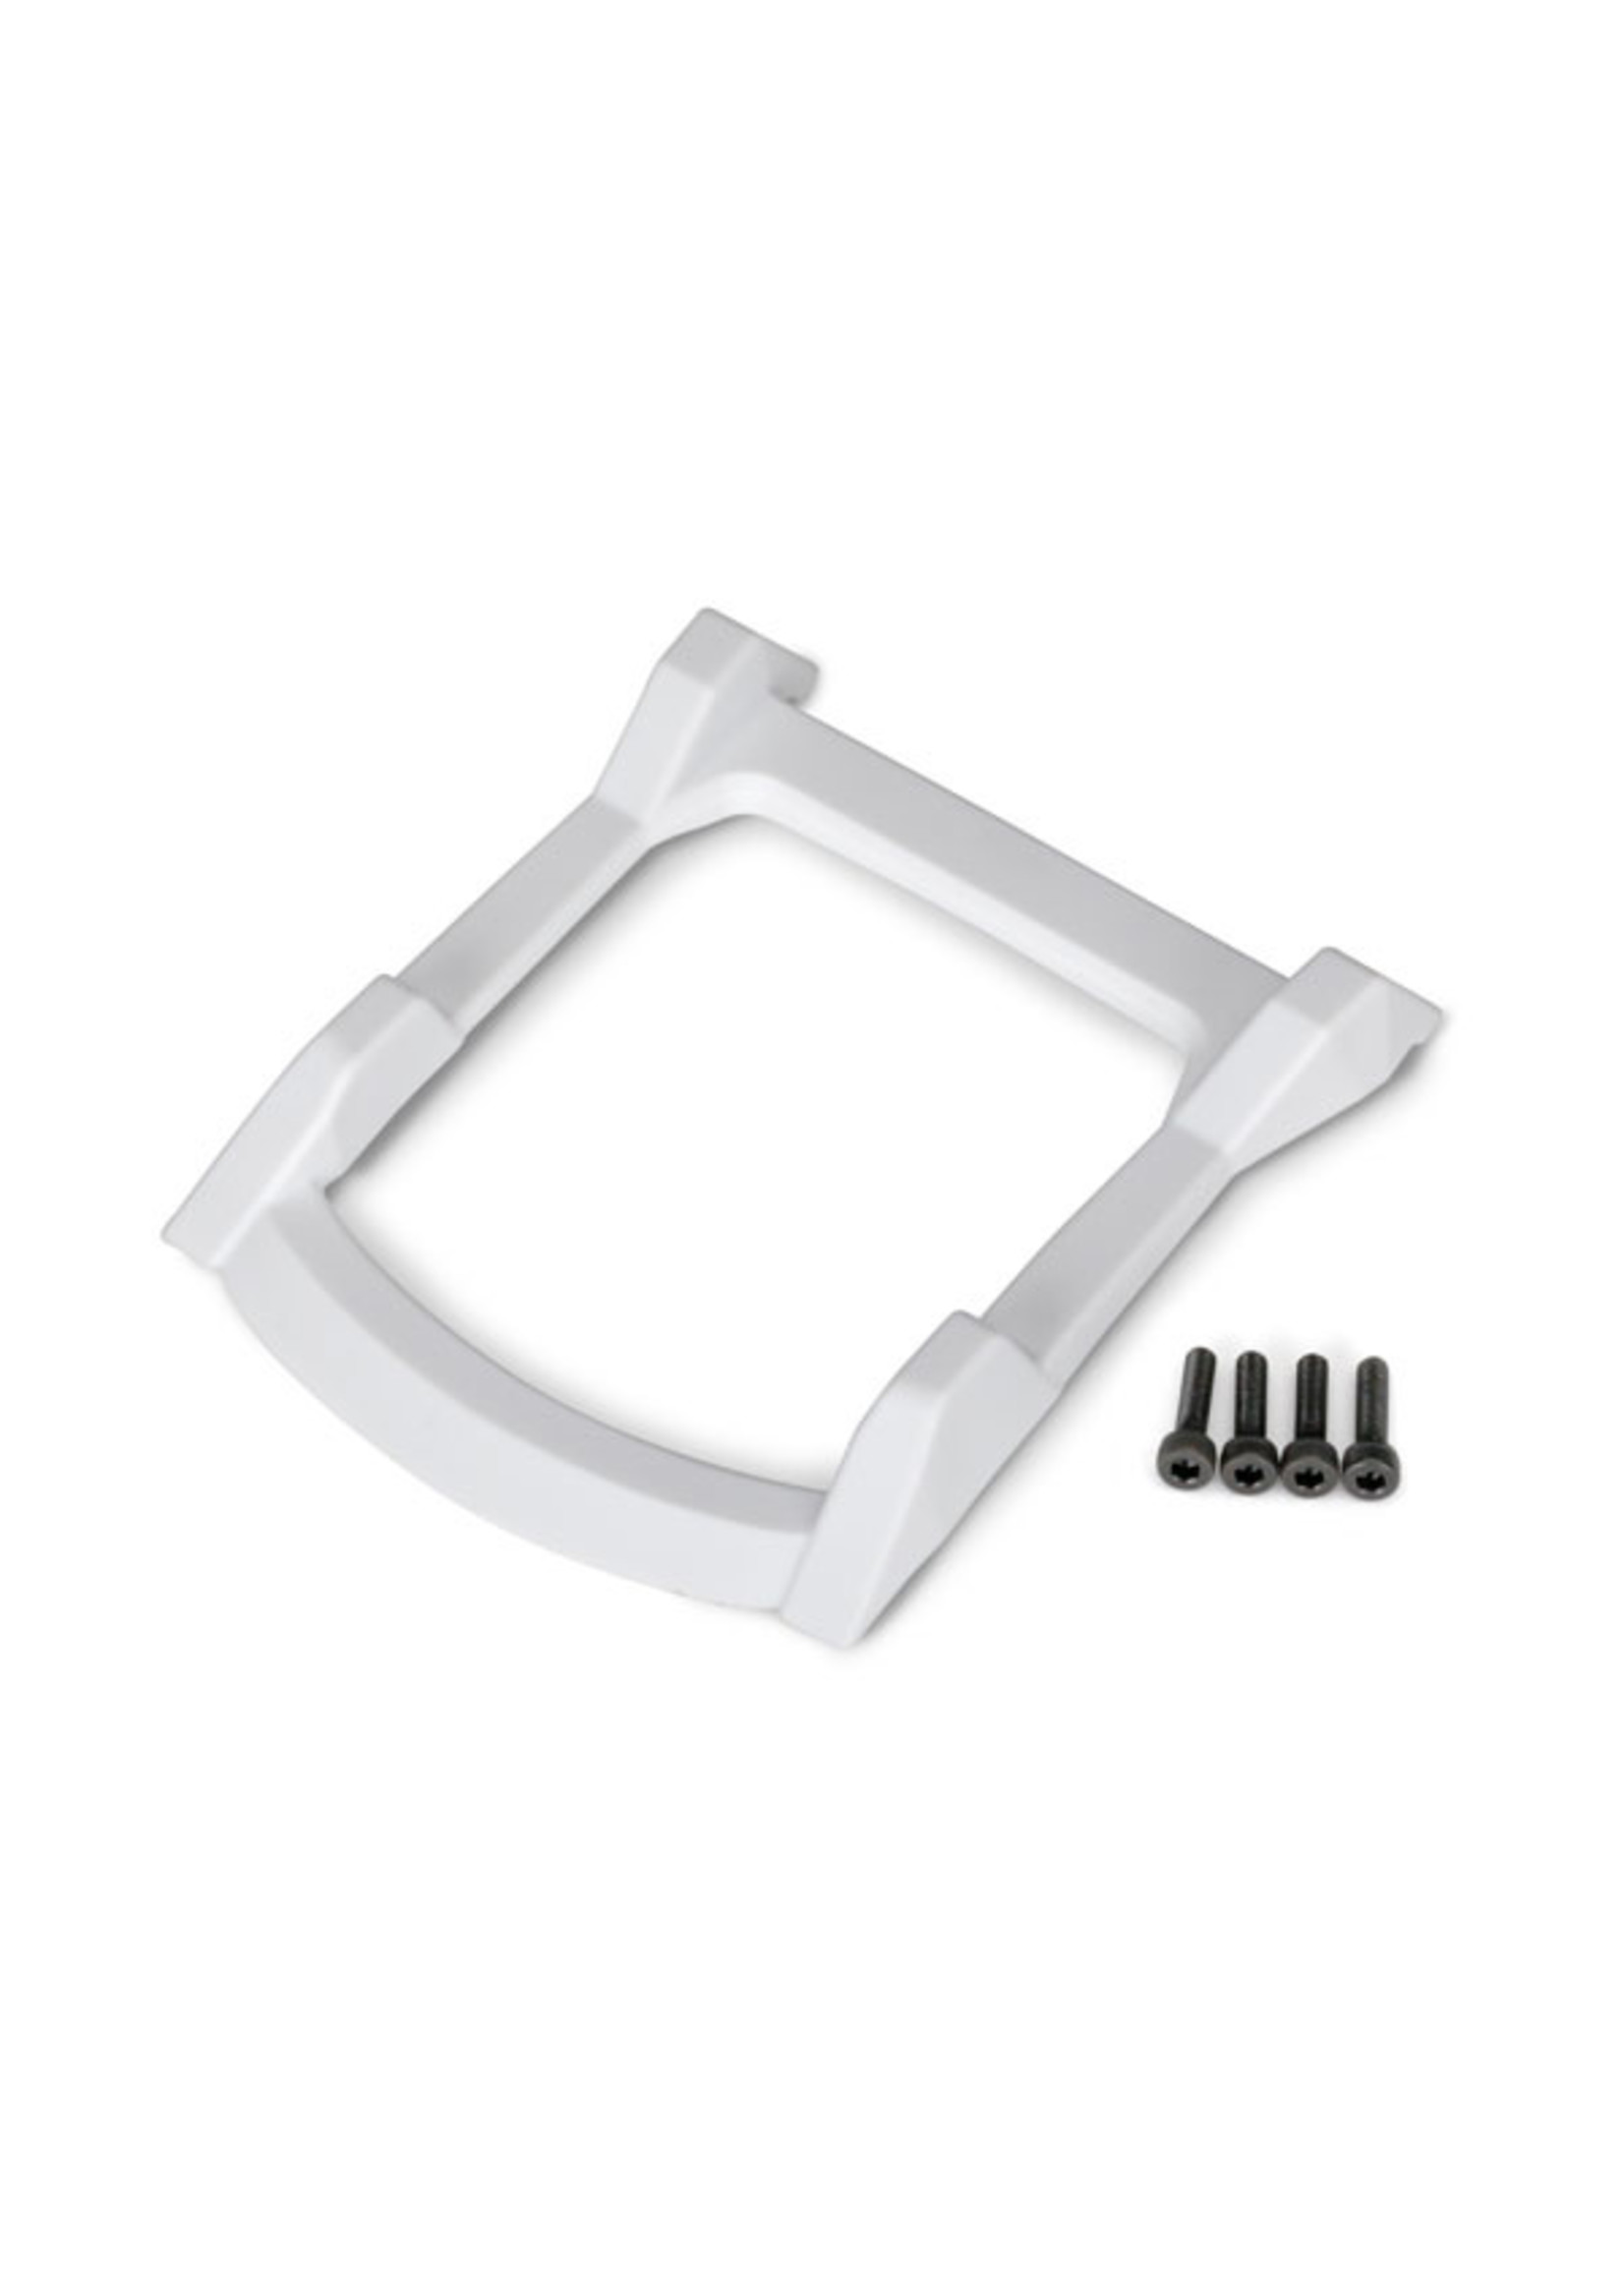 Traxxas 6728A - Skid Plate, Roof (Body) - White